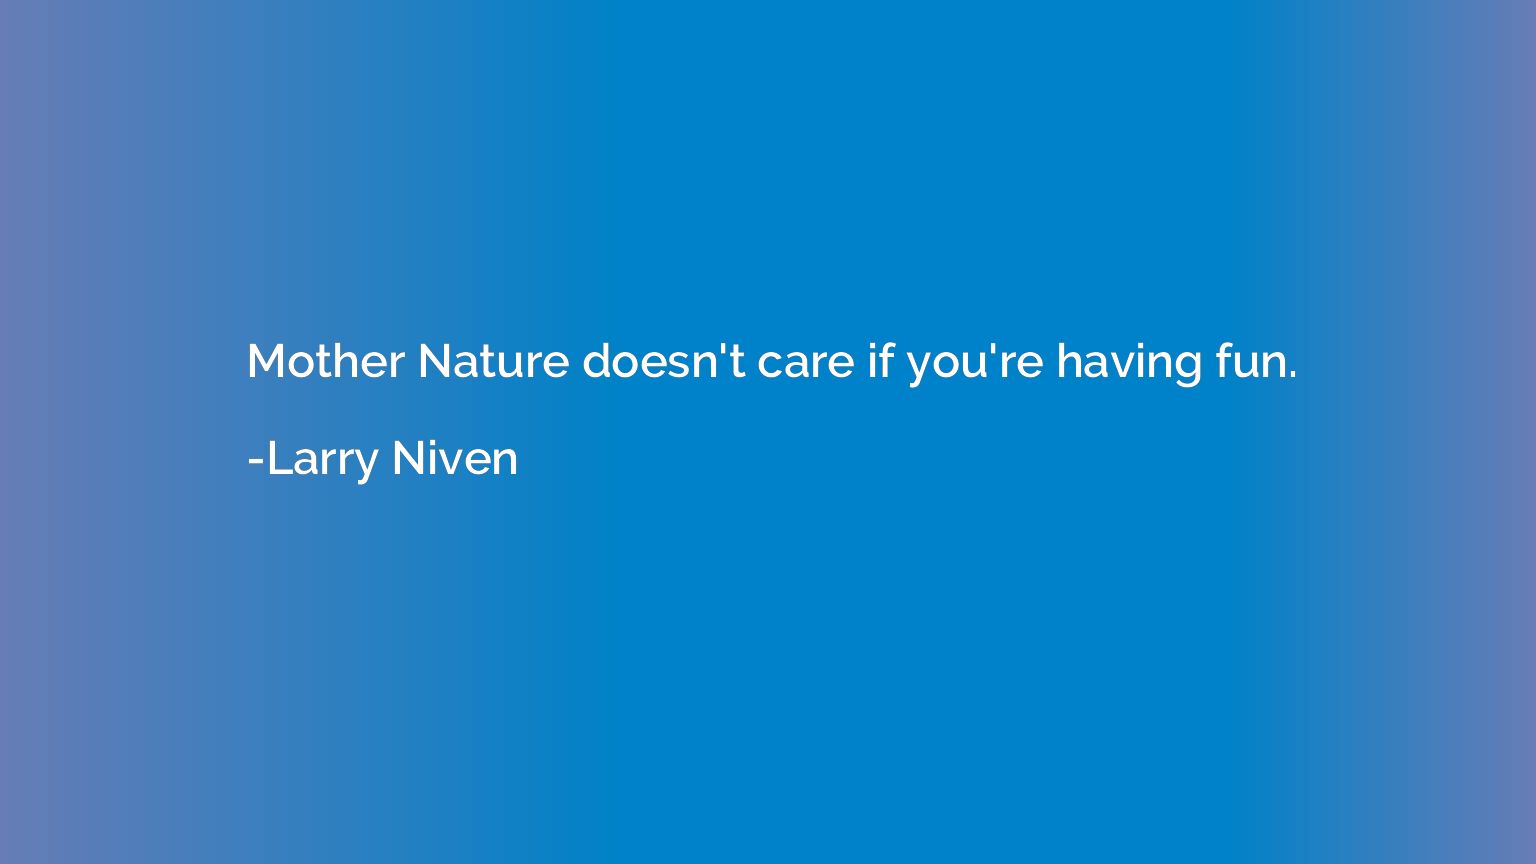 Mother Nature doesn't care if you're having fun.